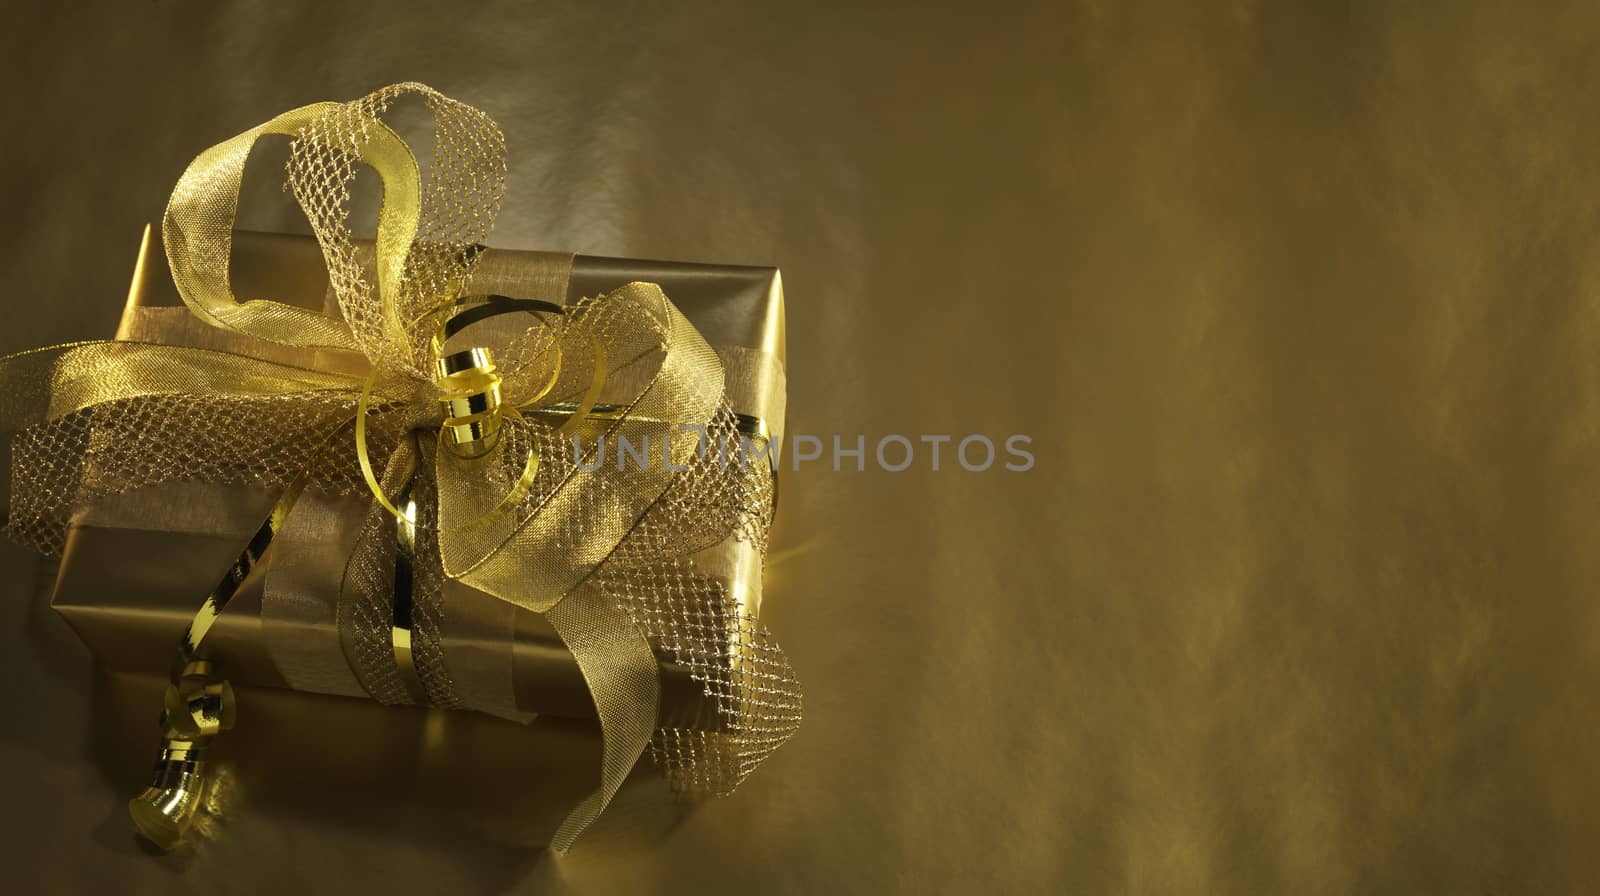 Golden gift box with baubles decorations and candles, Christmas